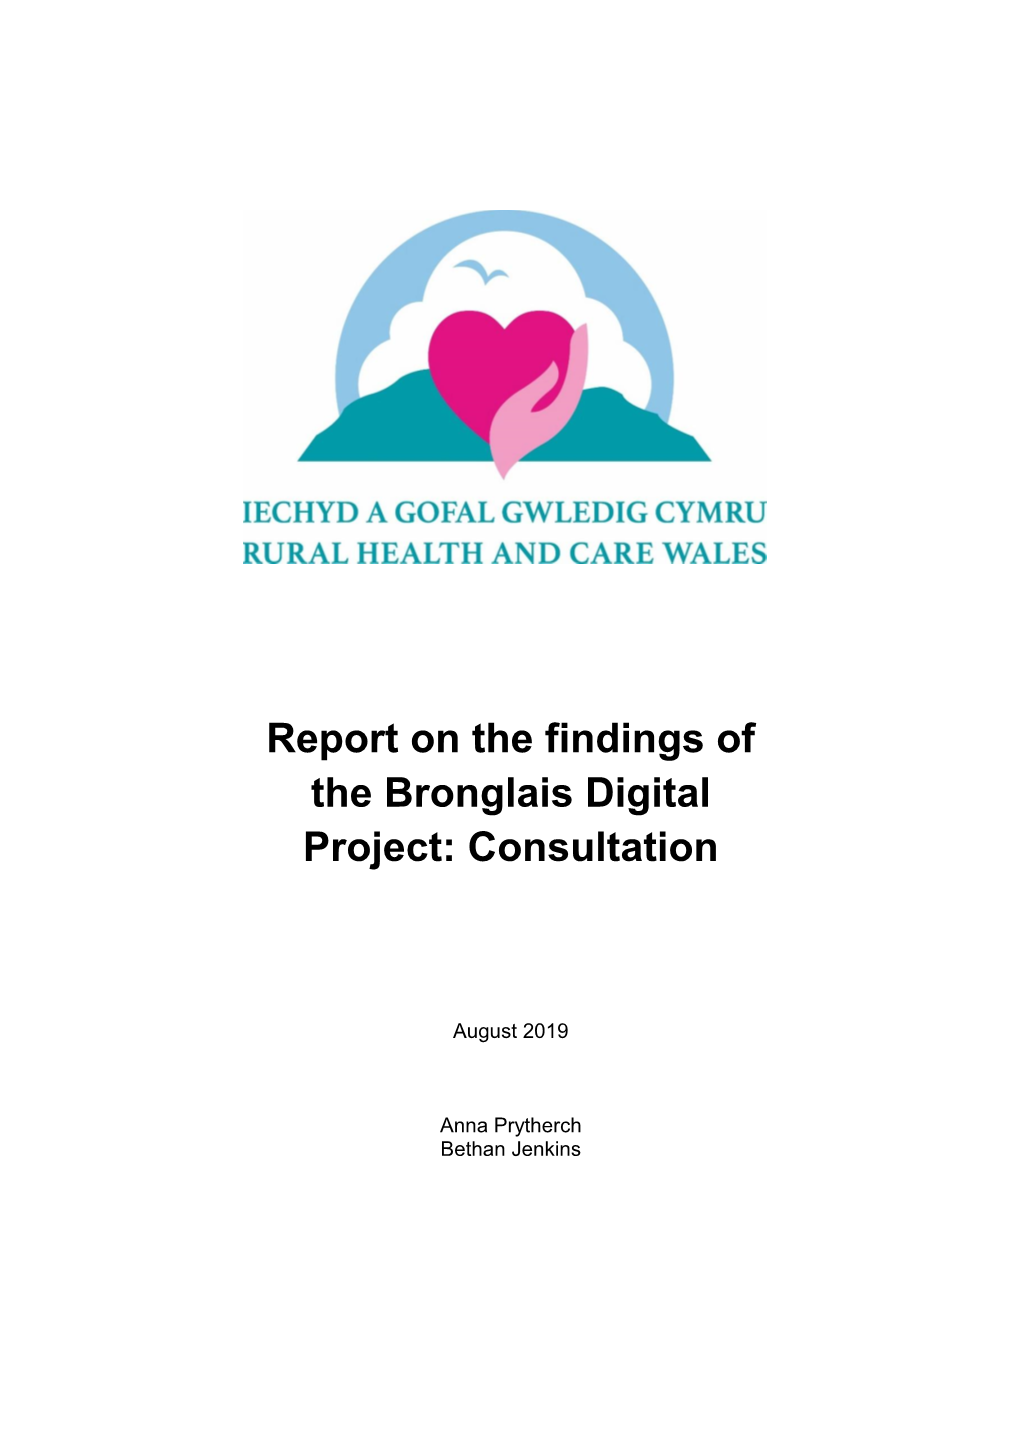 Report on the Findings of the Bronglais Digital Project: Consultation